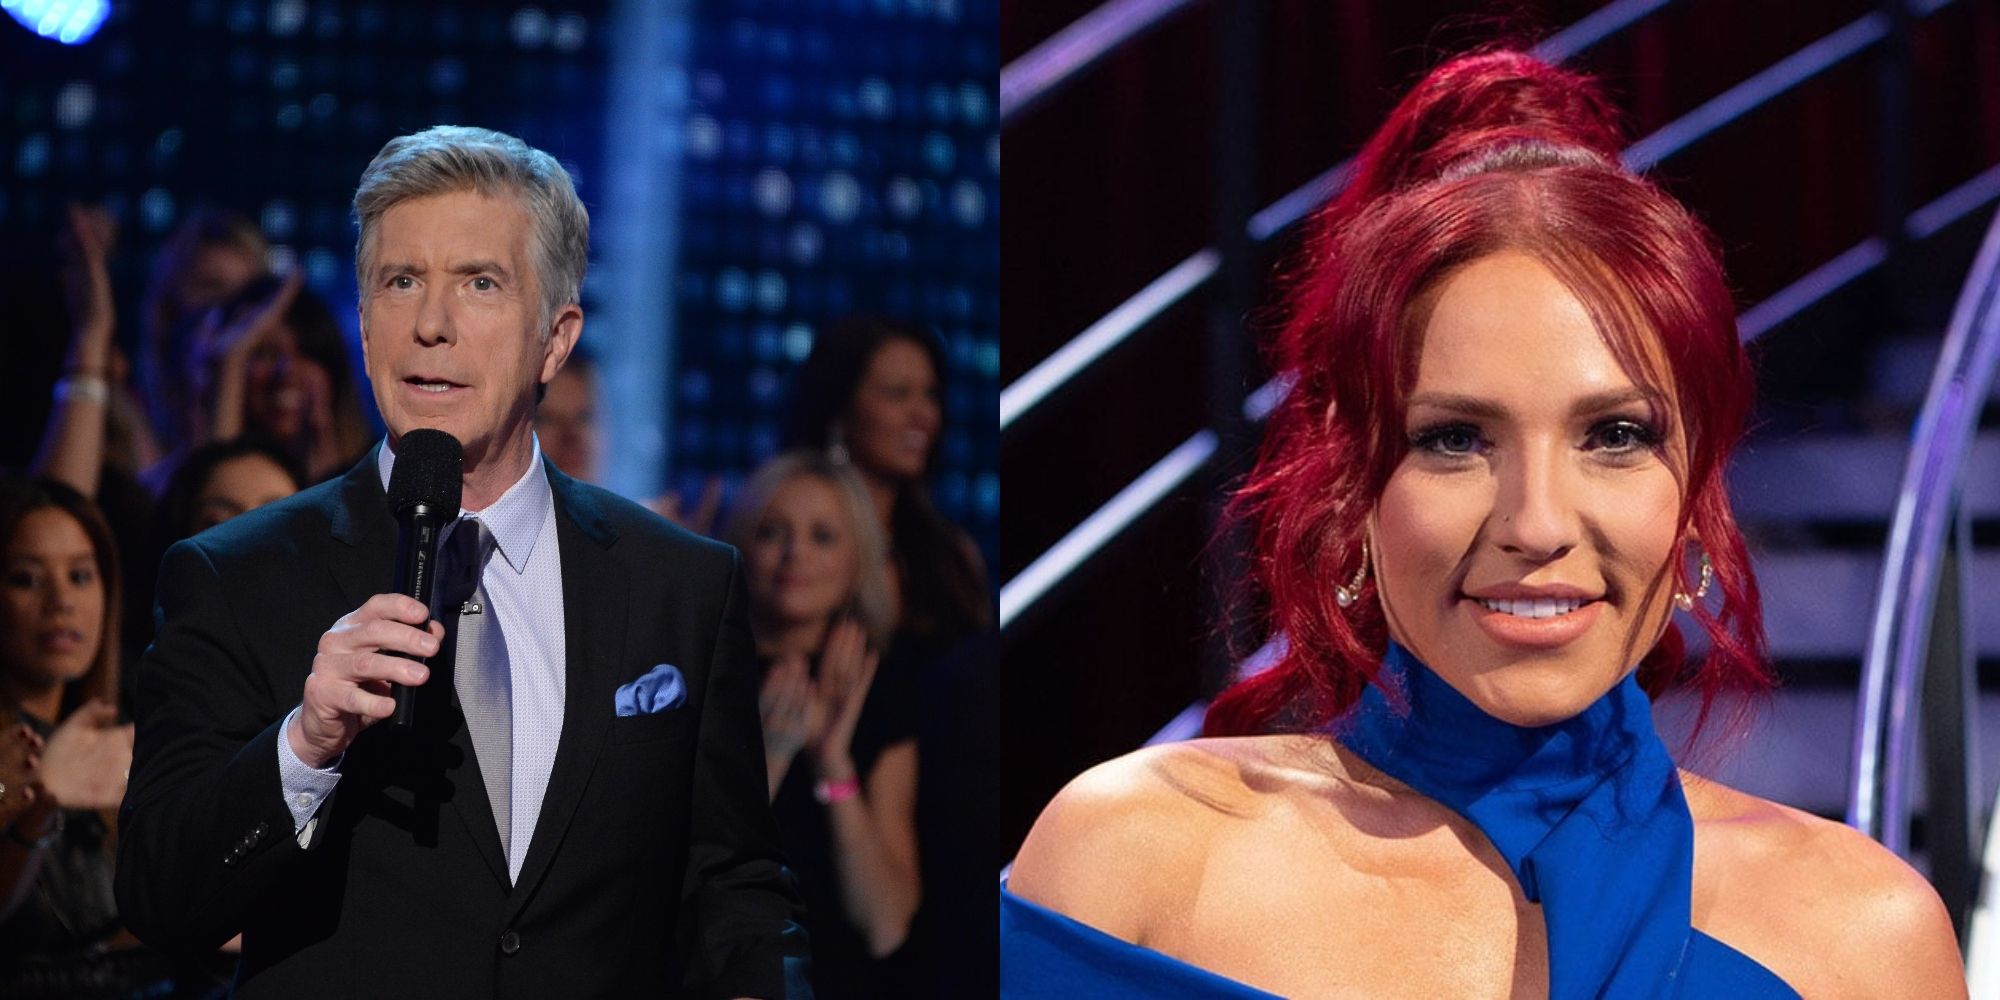 DWTS: Tom Bergeron & Sharna Burgess Reunite After His Exit From Show